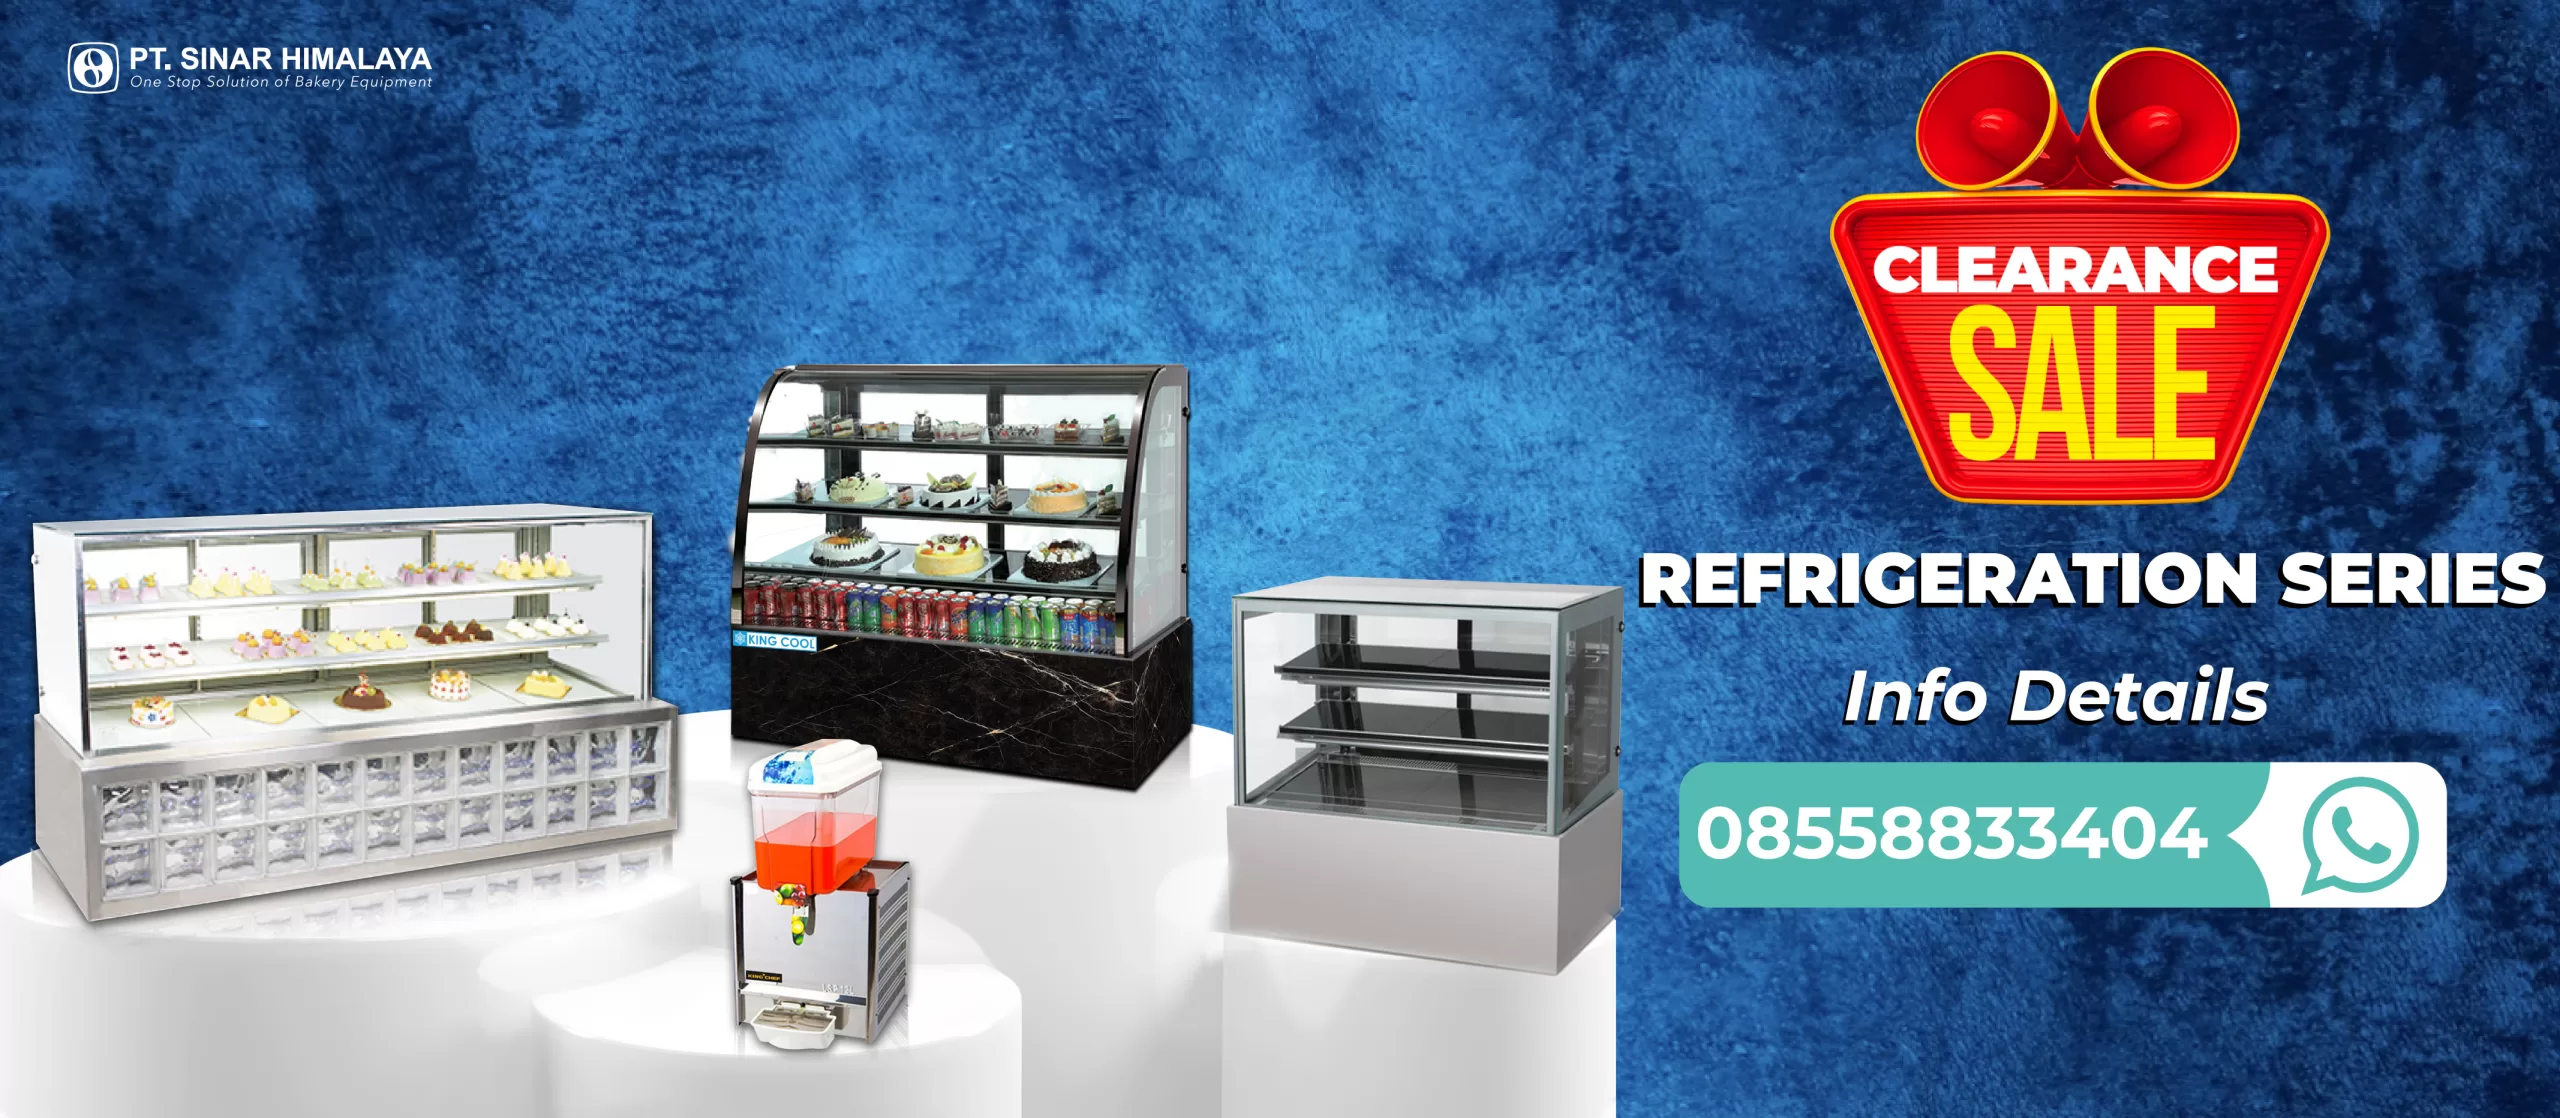 Clearance Sale Refrigeration Series